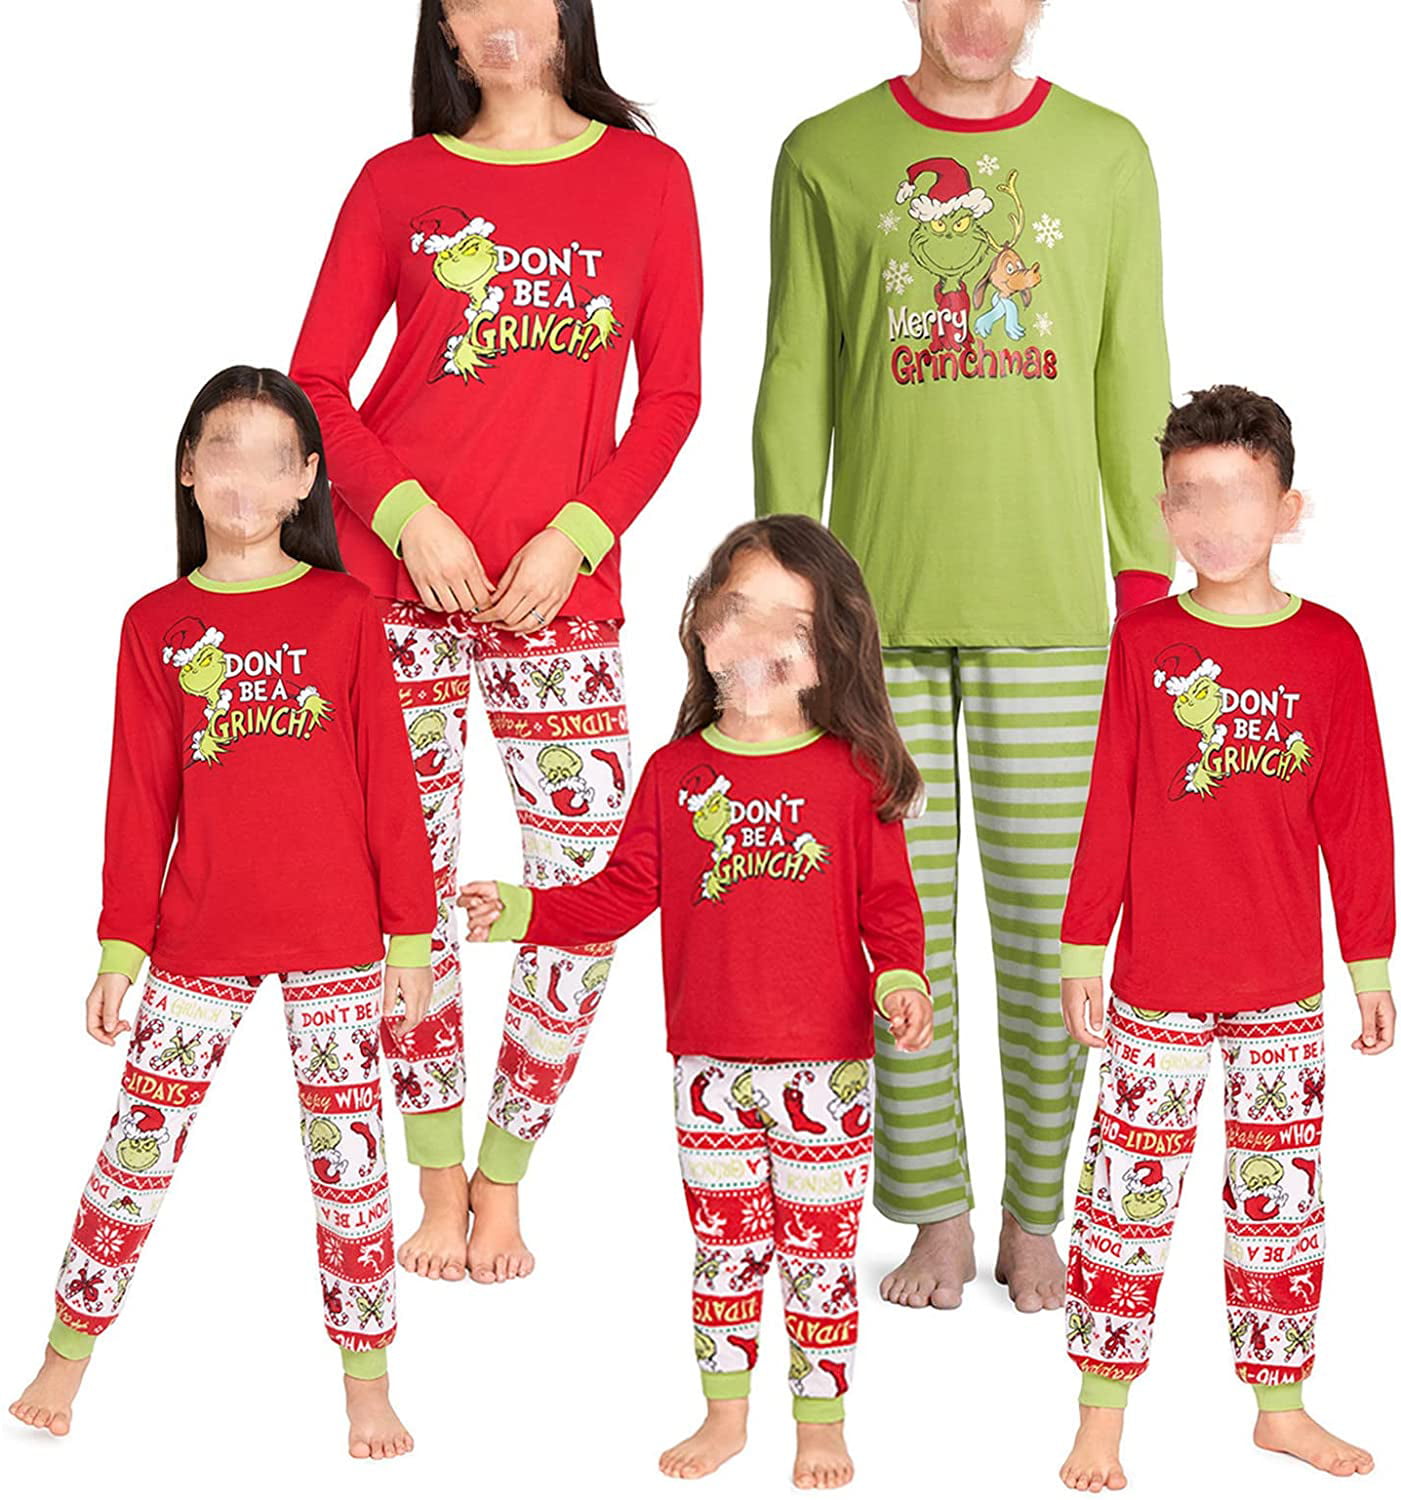 Grinch Family Matching Christmas Pajamas Long Sleeve Sets Round Neck Homewear Outfit Cotton Sleepwear Set Tight-fit 2-Piece Pajama Set